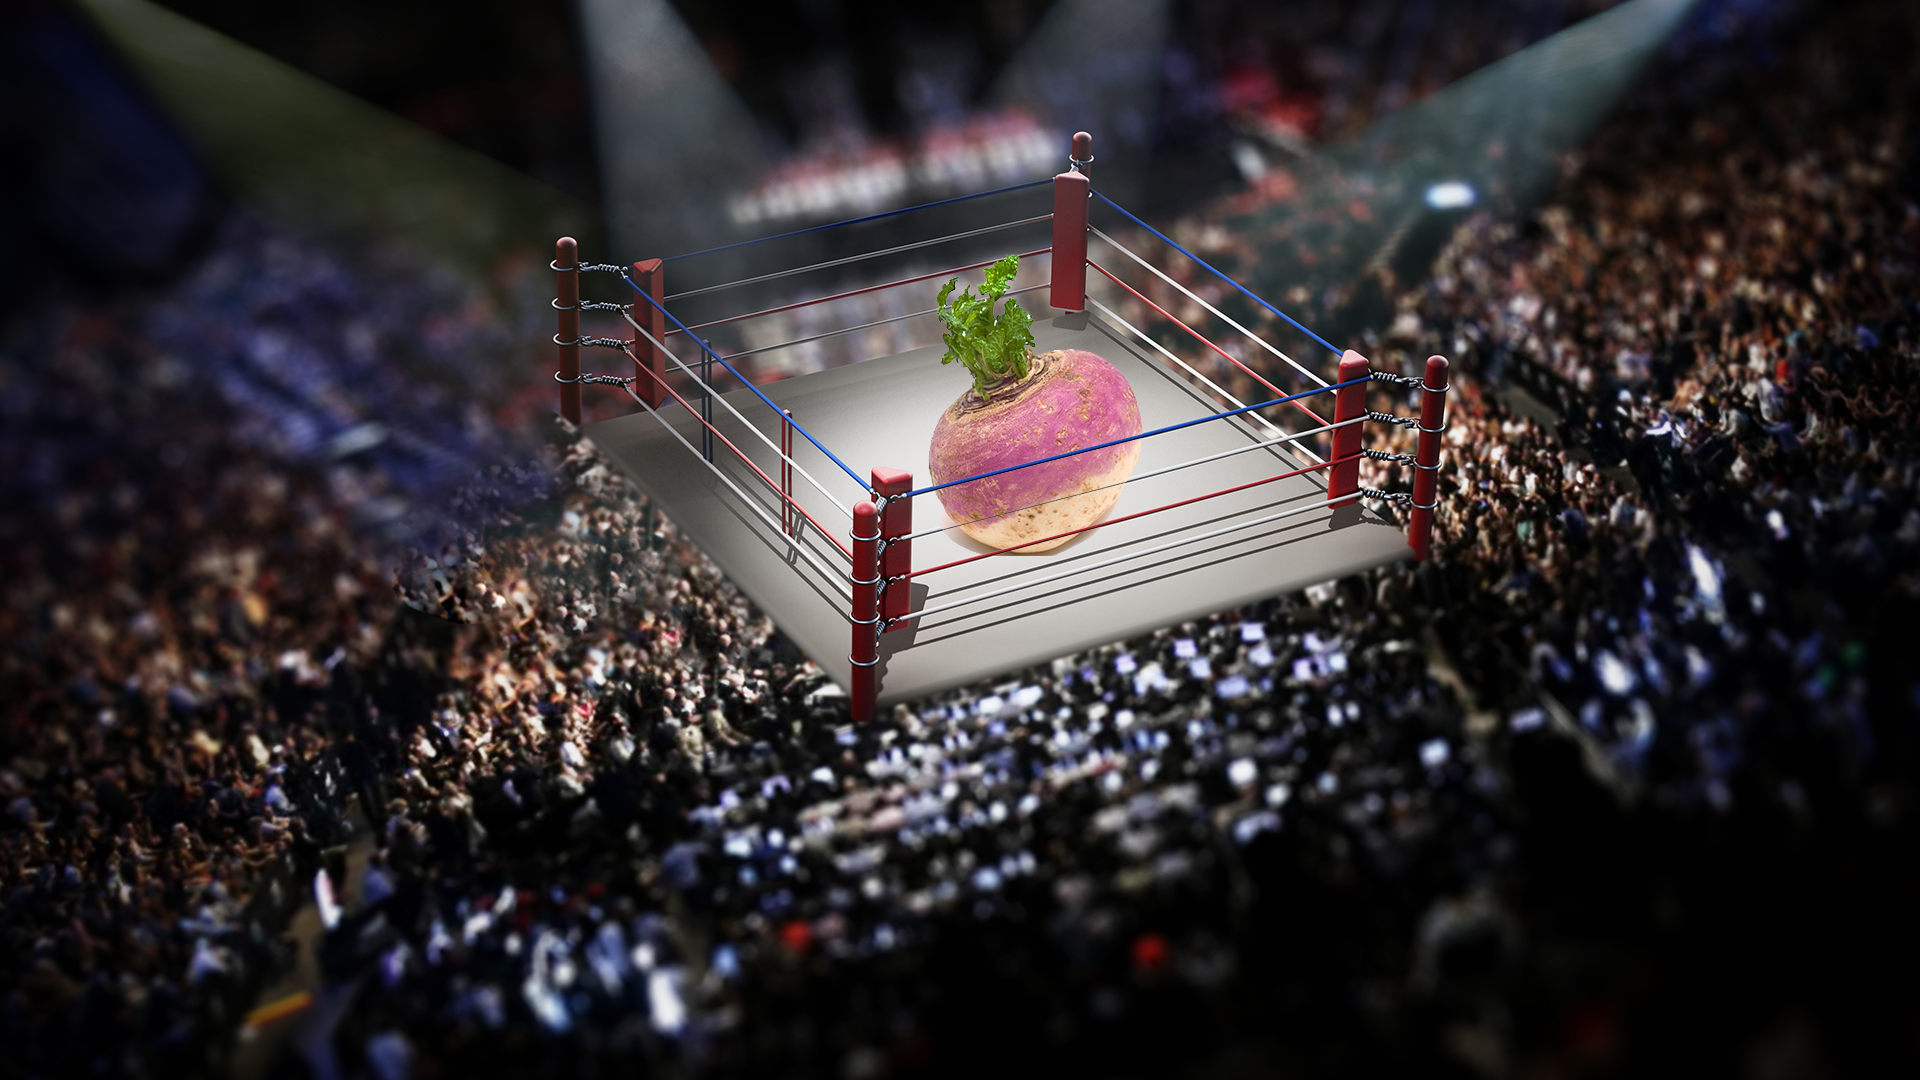 Wrestling ring with comically oversized turnip inside